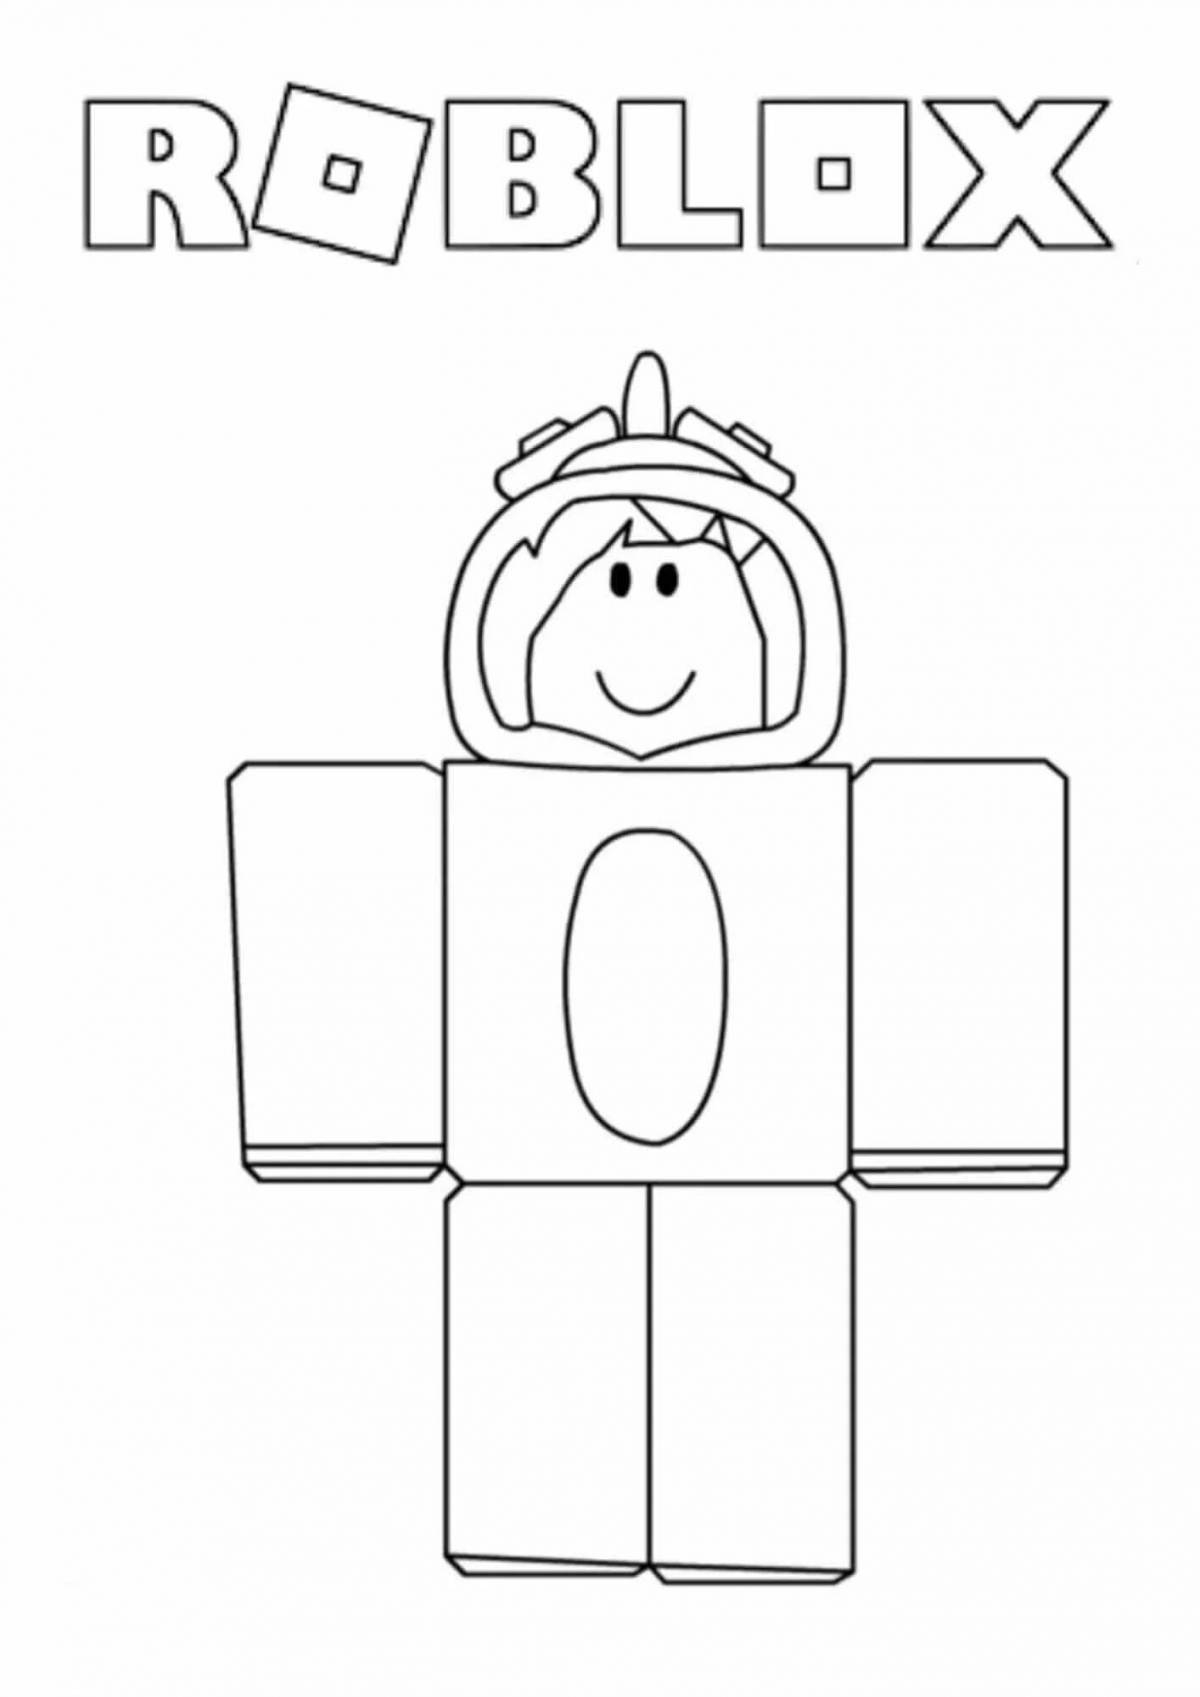 Color-explosion roblox dors figure coloring page